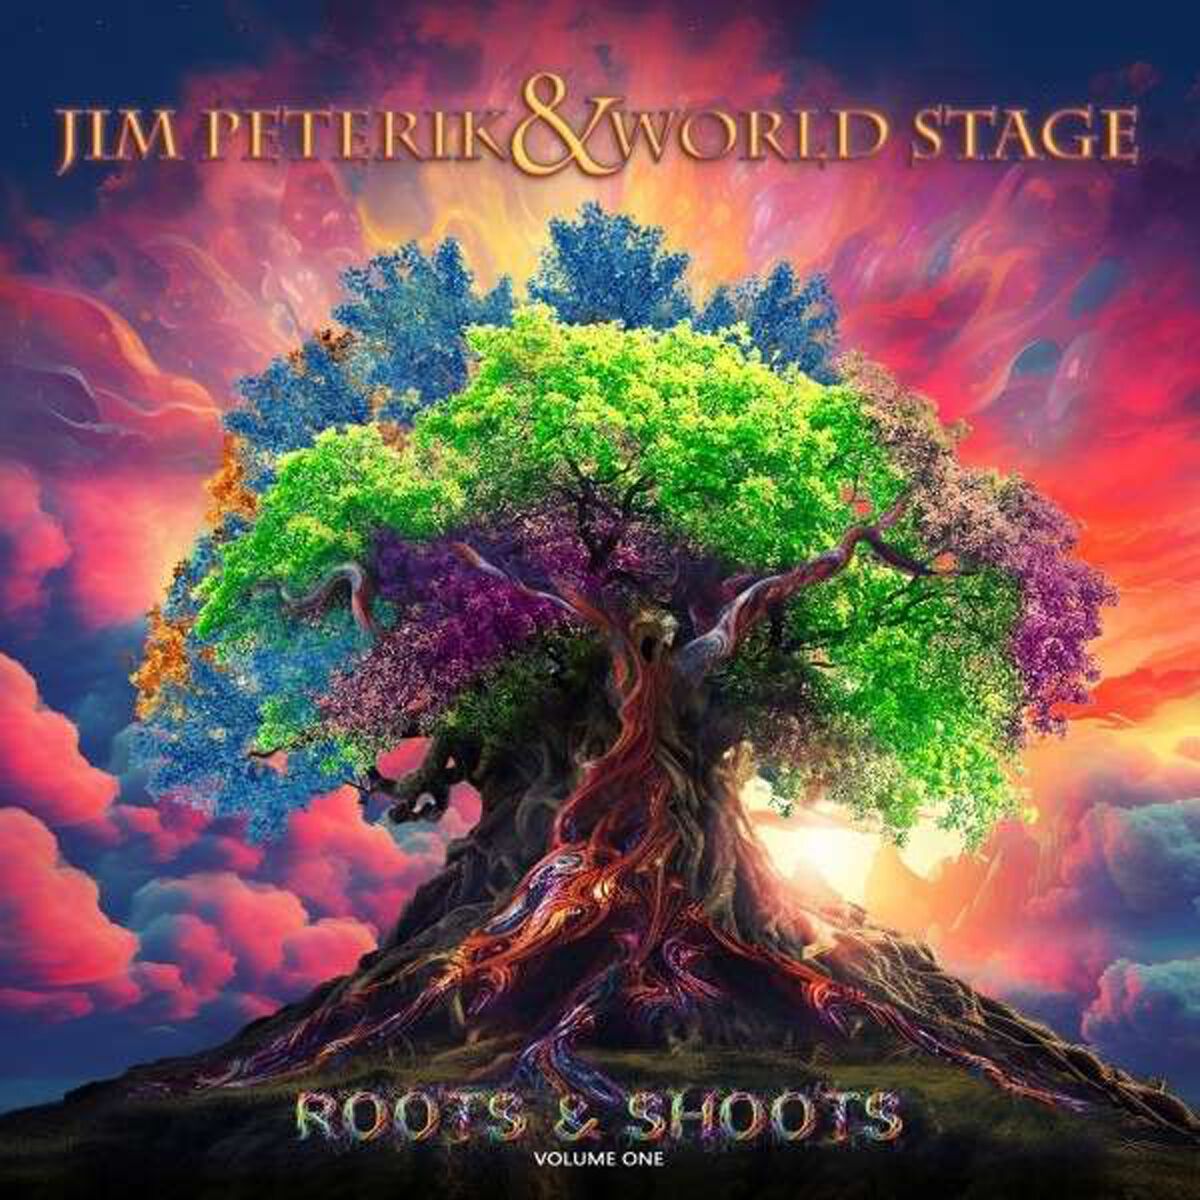 Jim Peterik And World Stage Roots & Shoots Vol. One CD multicolor